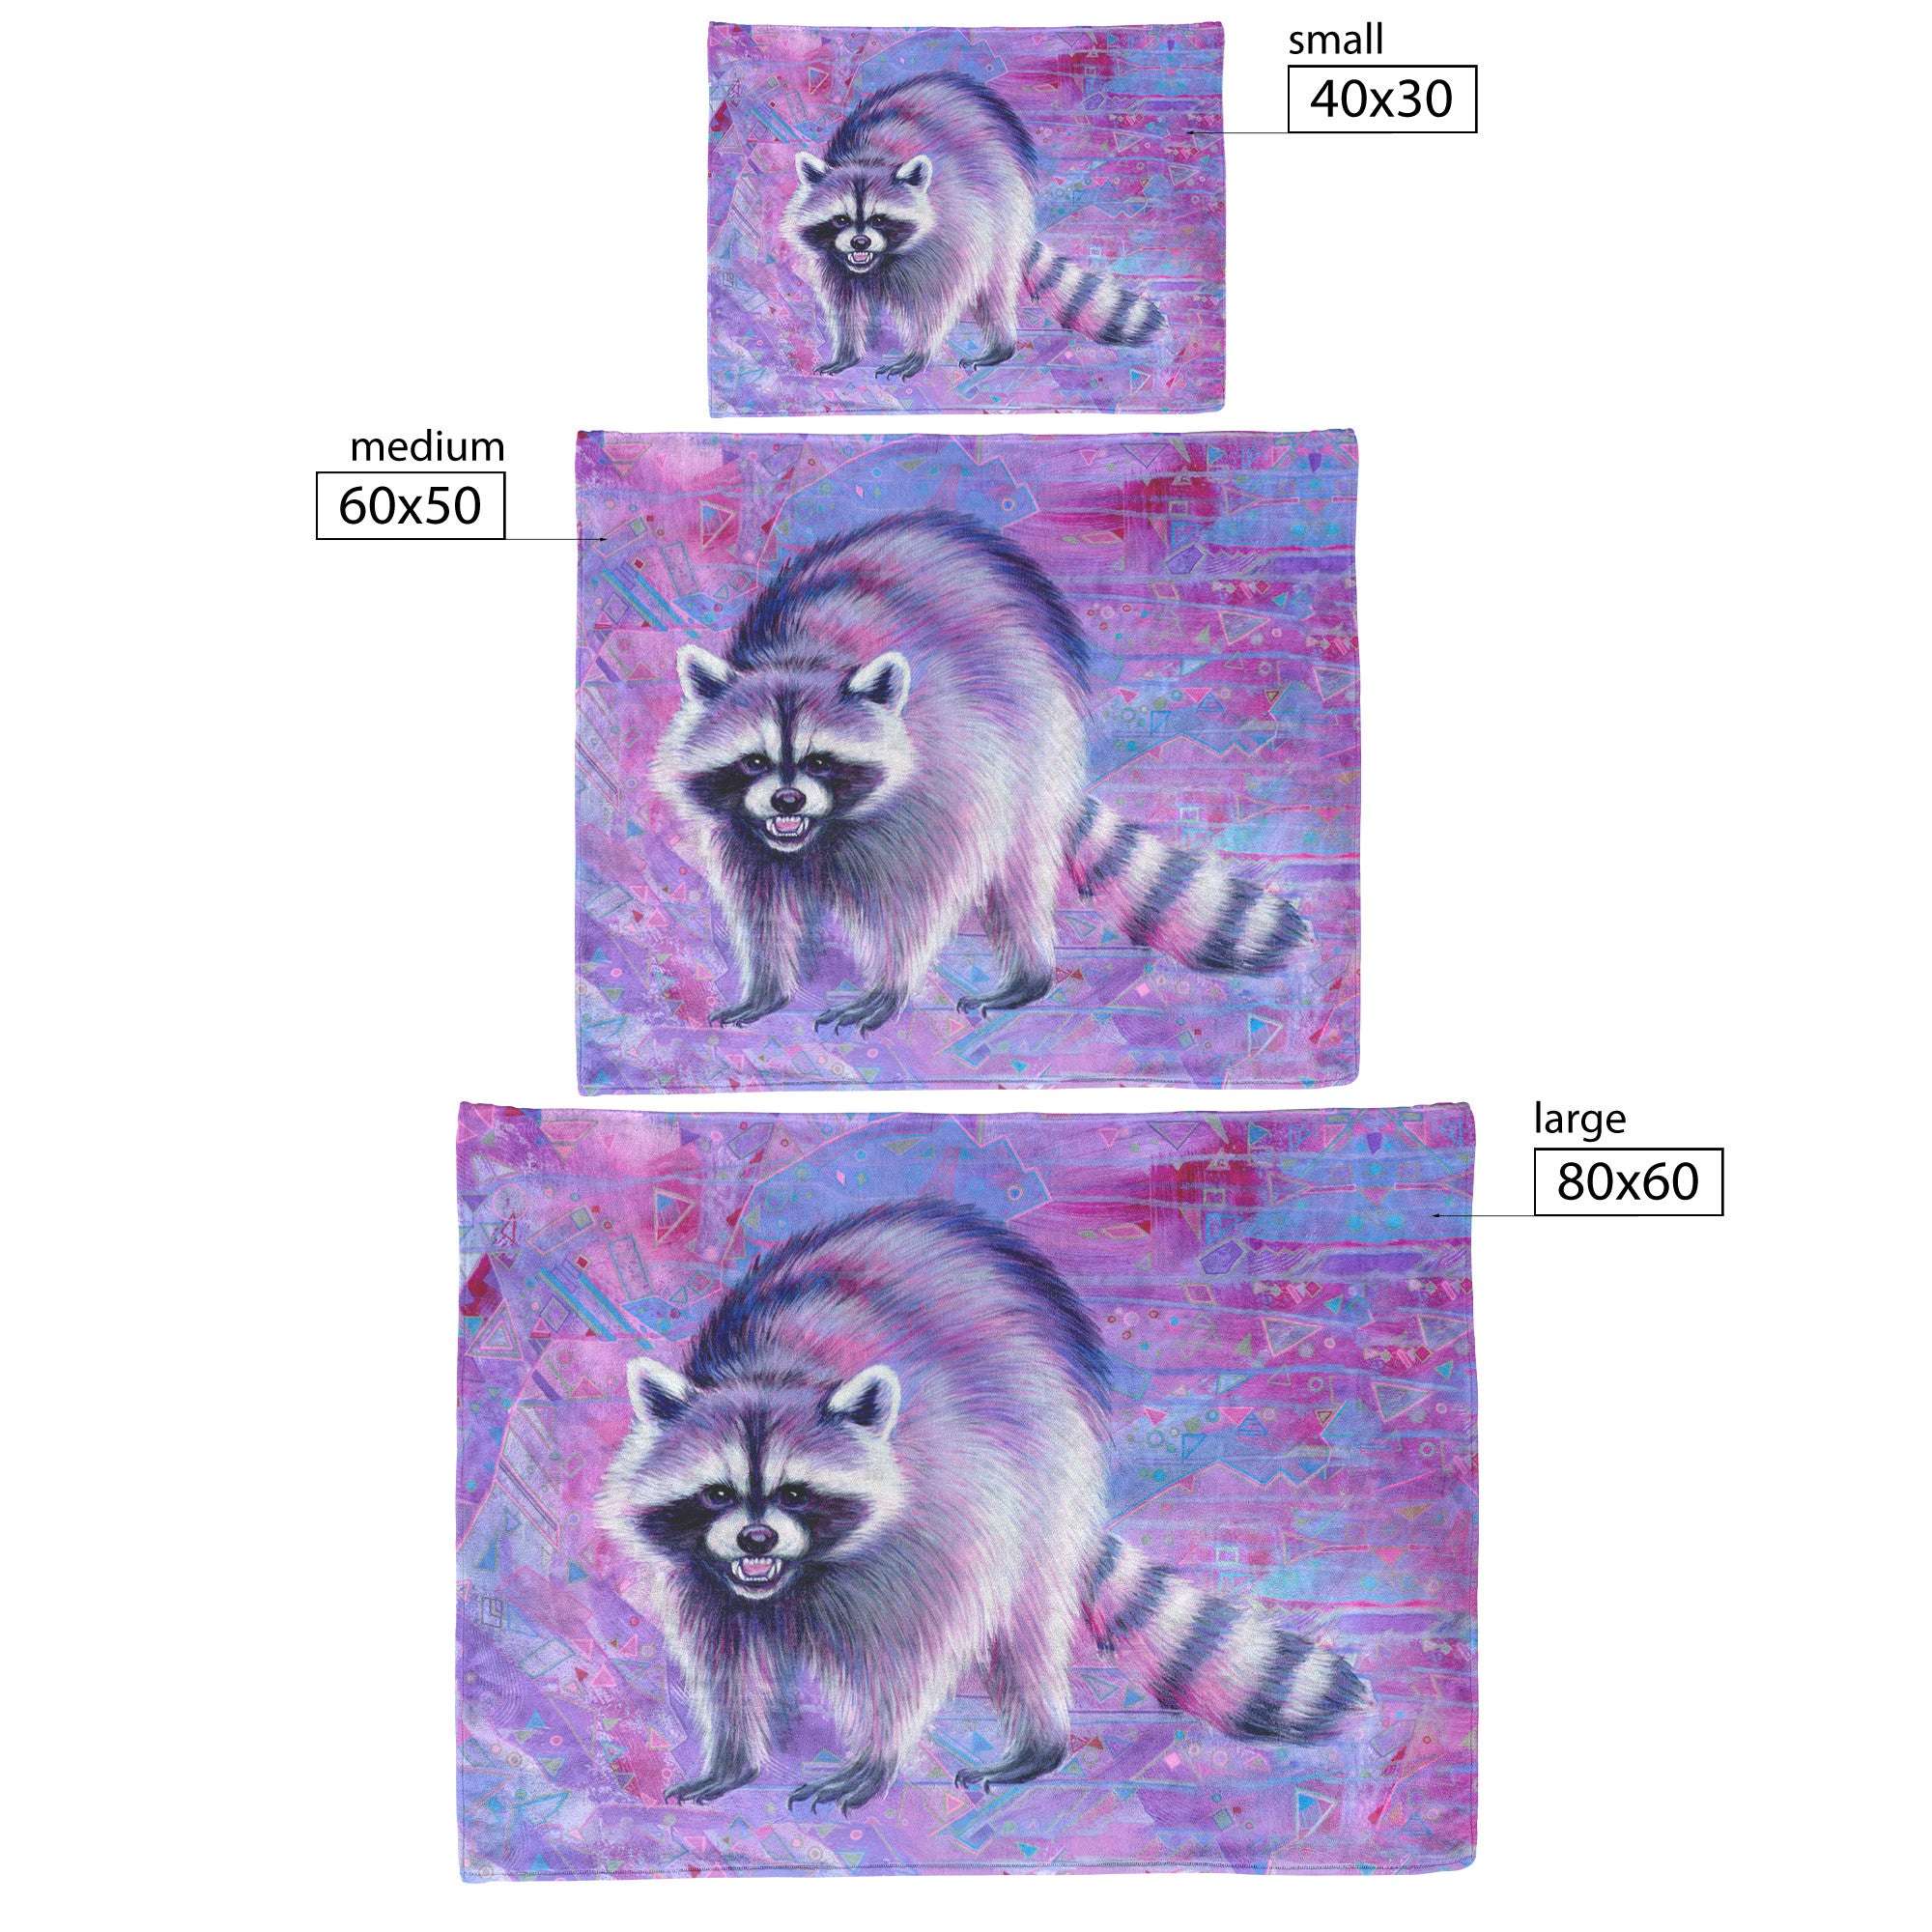 Three Raccoon Blankets with different sizes: small (40x30), medium (60x50), and large (80x60).